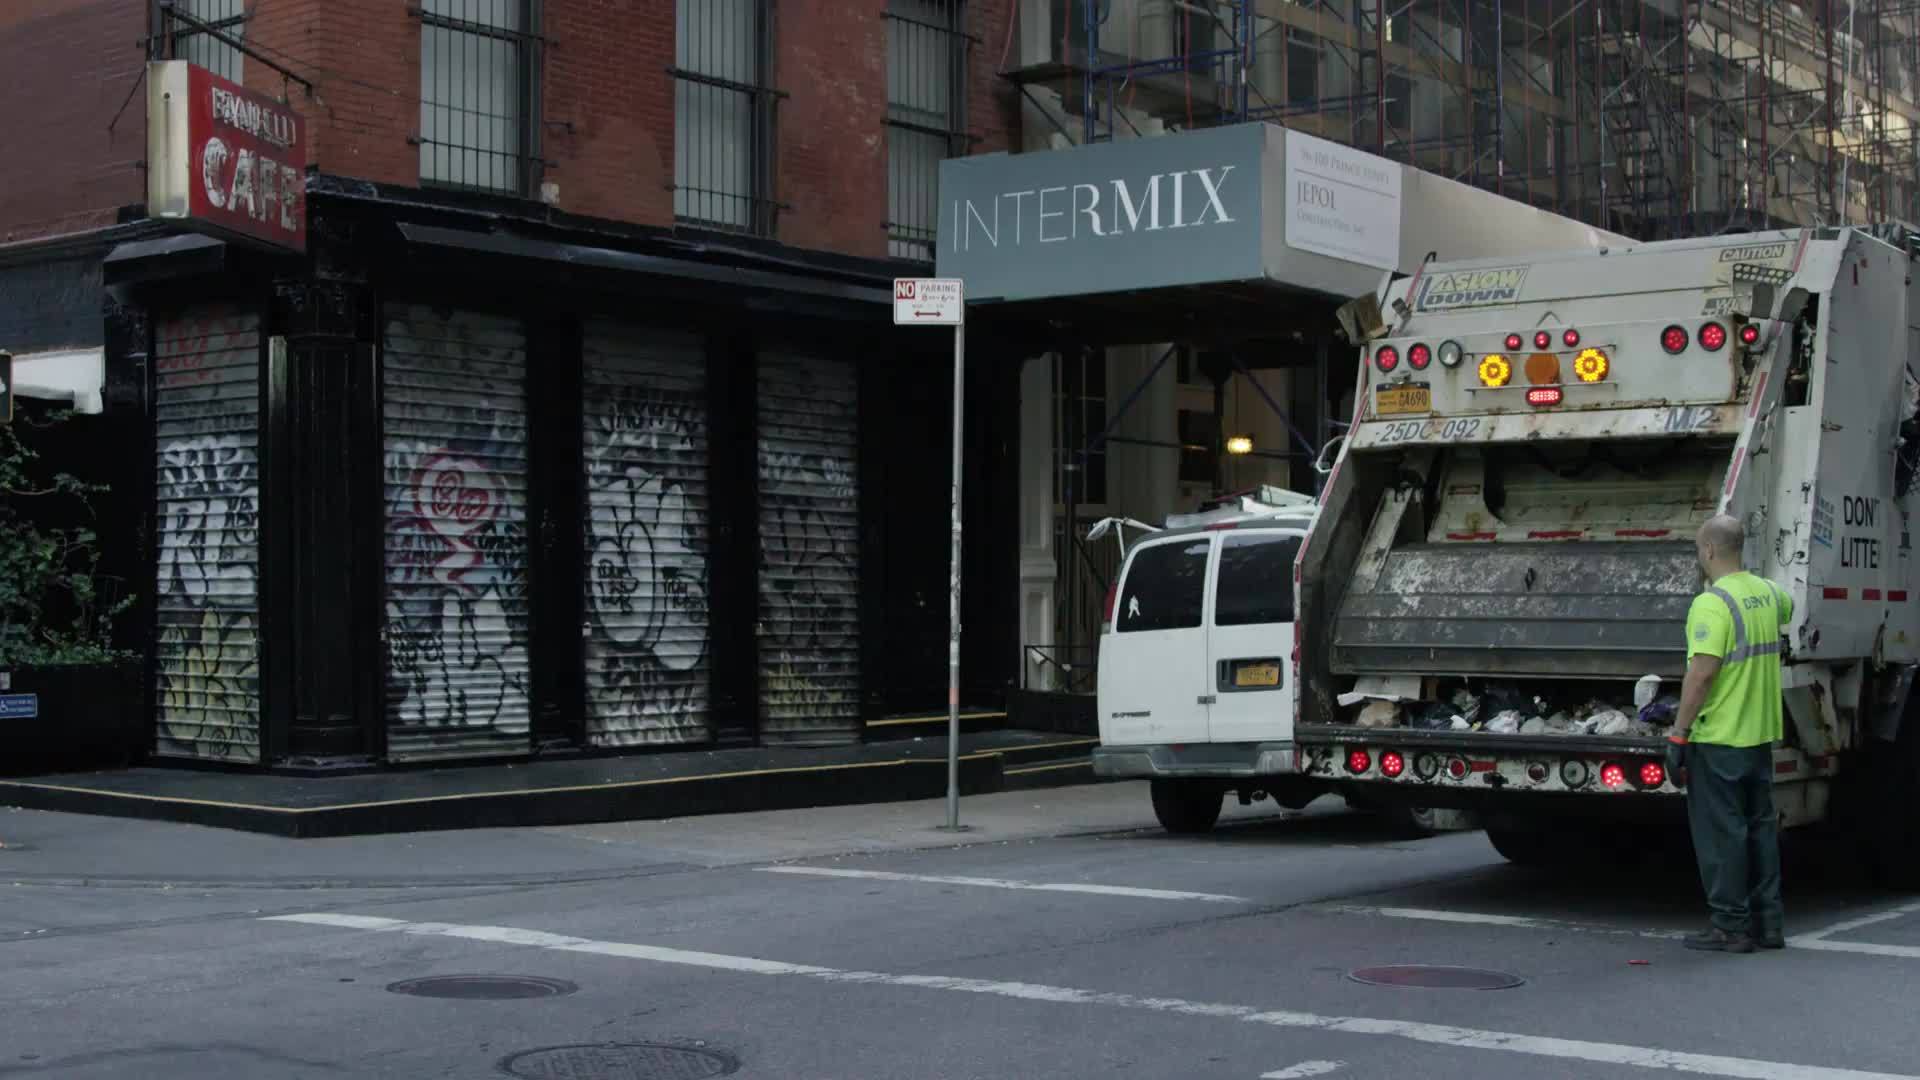 garbage truck on quiet empty street SoHo morning graffiti metal shutter gate over storefronts